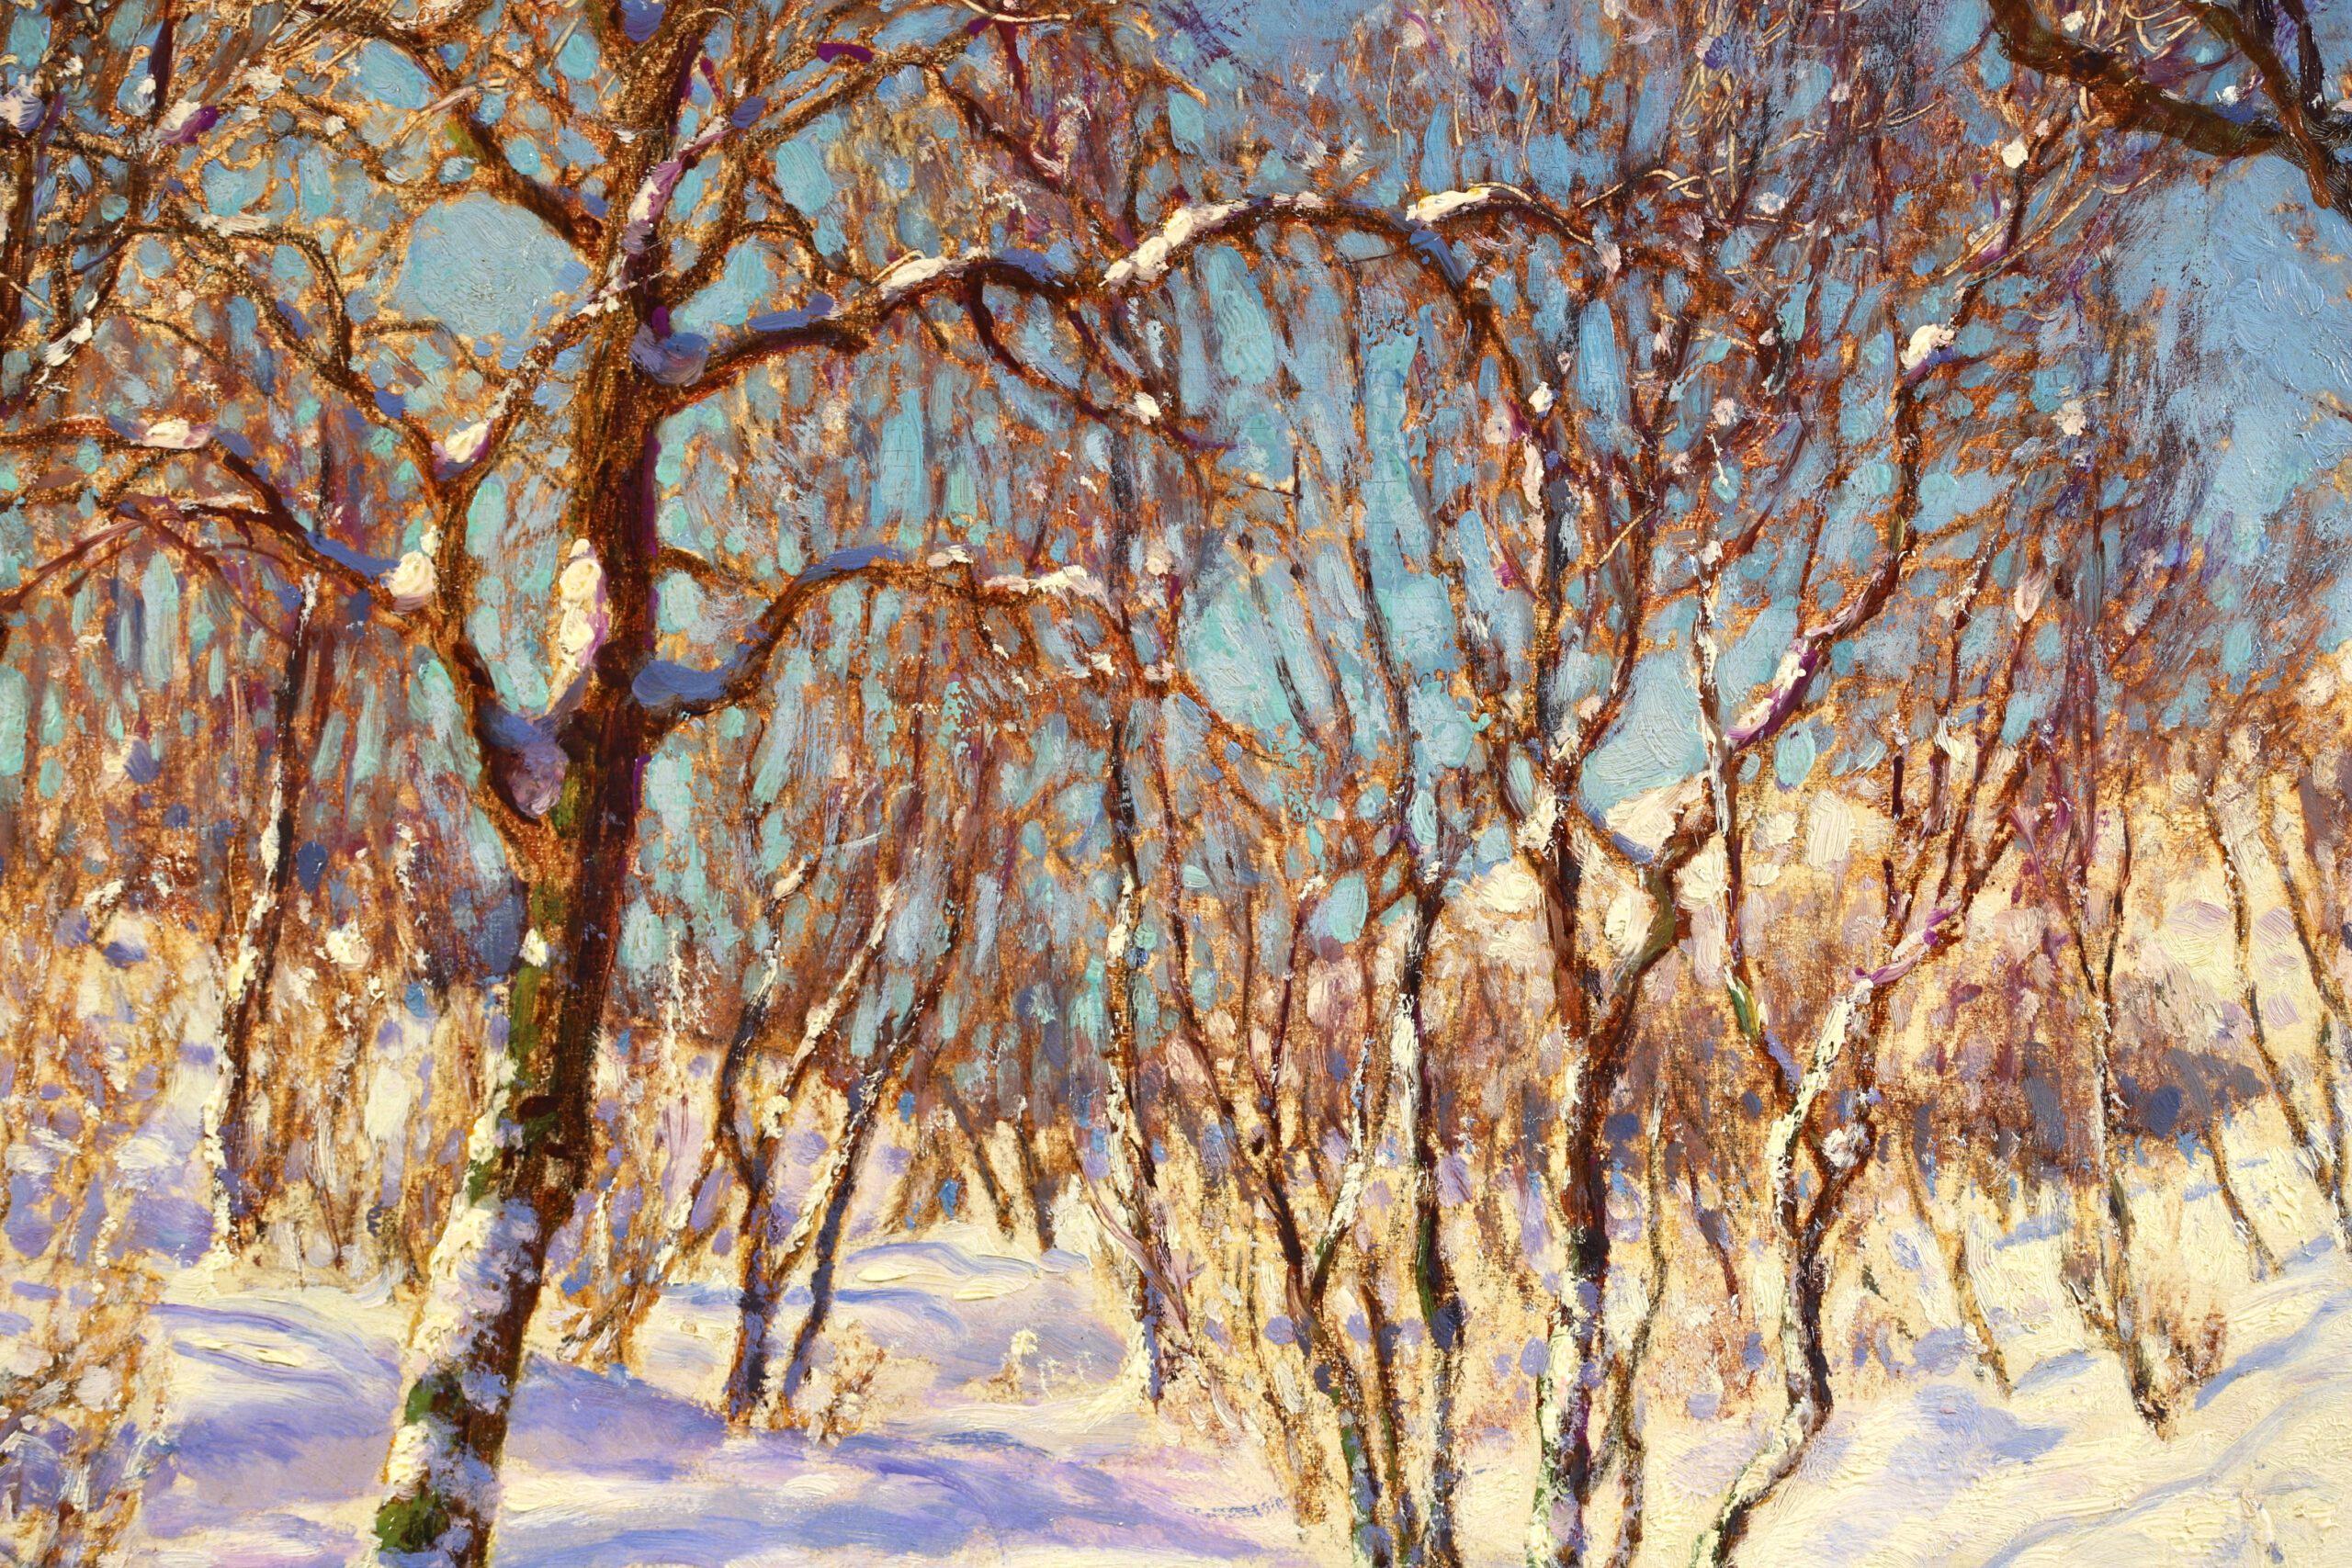 Signed and dated oil on canvas landscape by Russian Realist painter Ivan Fedorovich Choultse. This stunning piece depicts the winter sun shining down on a thick blanket of snow. The bare trees are creating blue shadows on the white snow and a stream